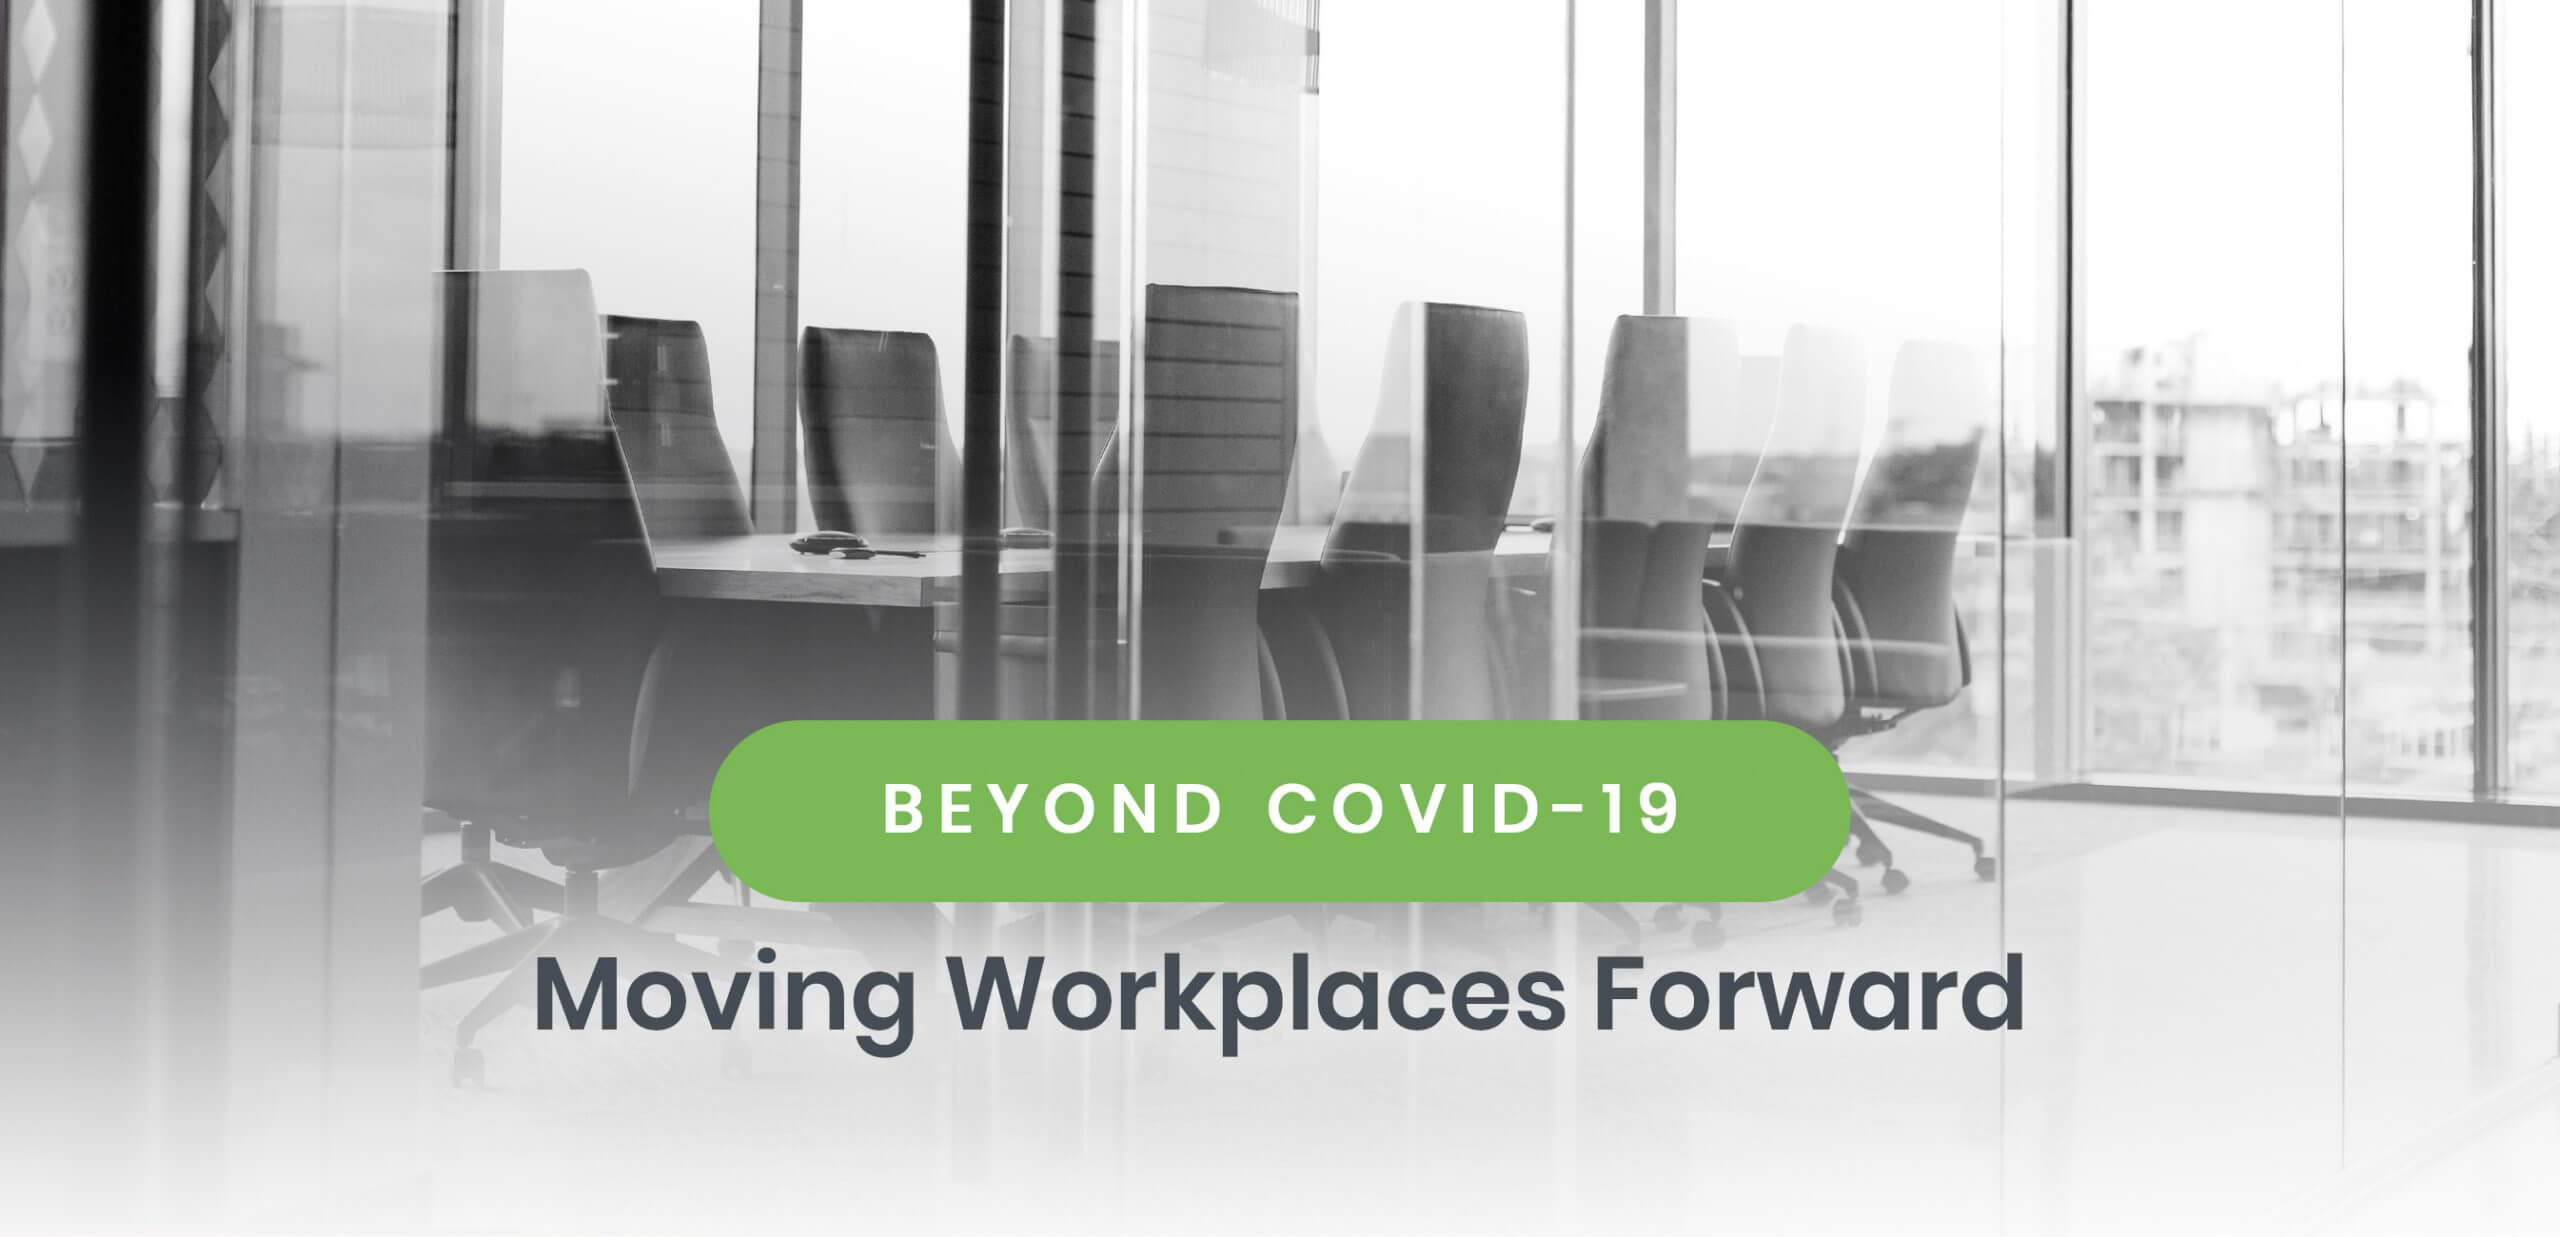 Beyond COVID-19: What It Will Take for Workplaces to Keep Moving Forward